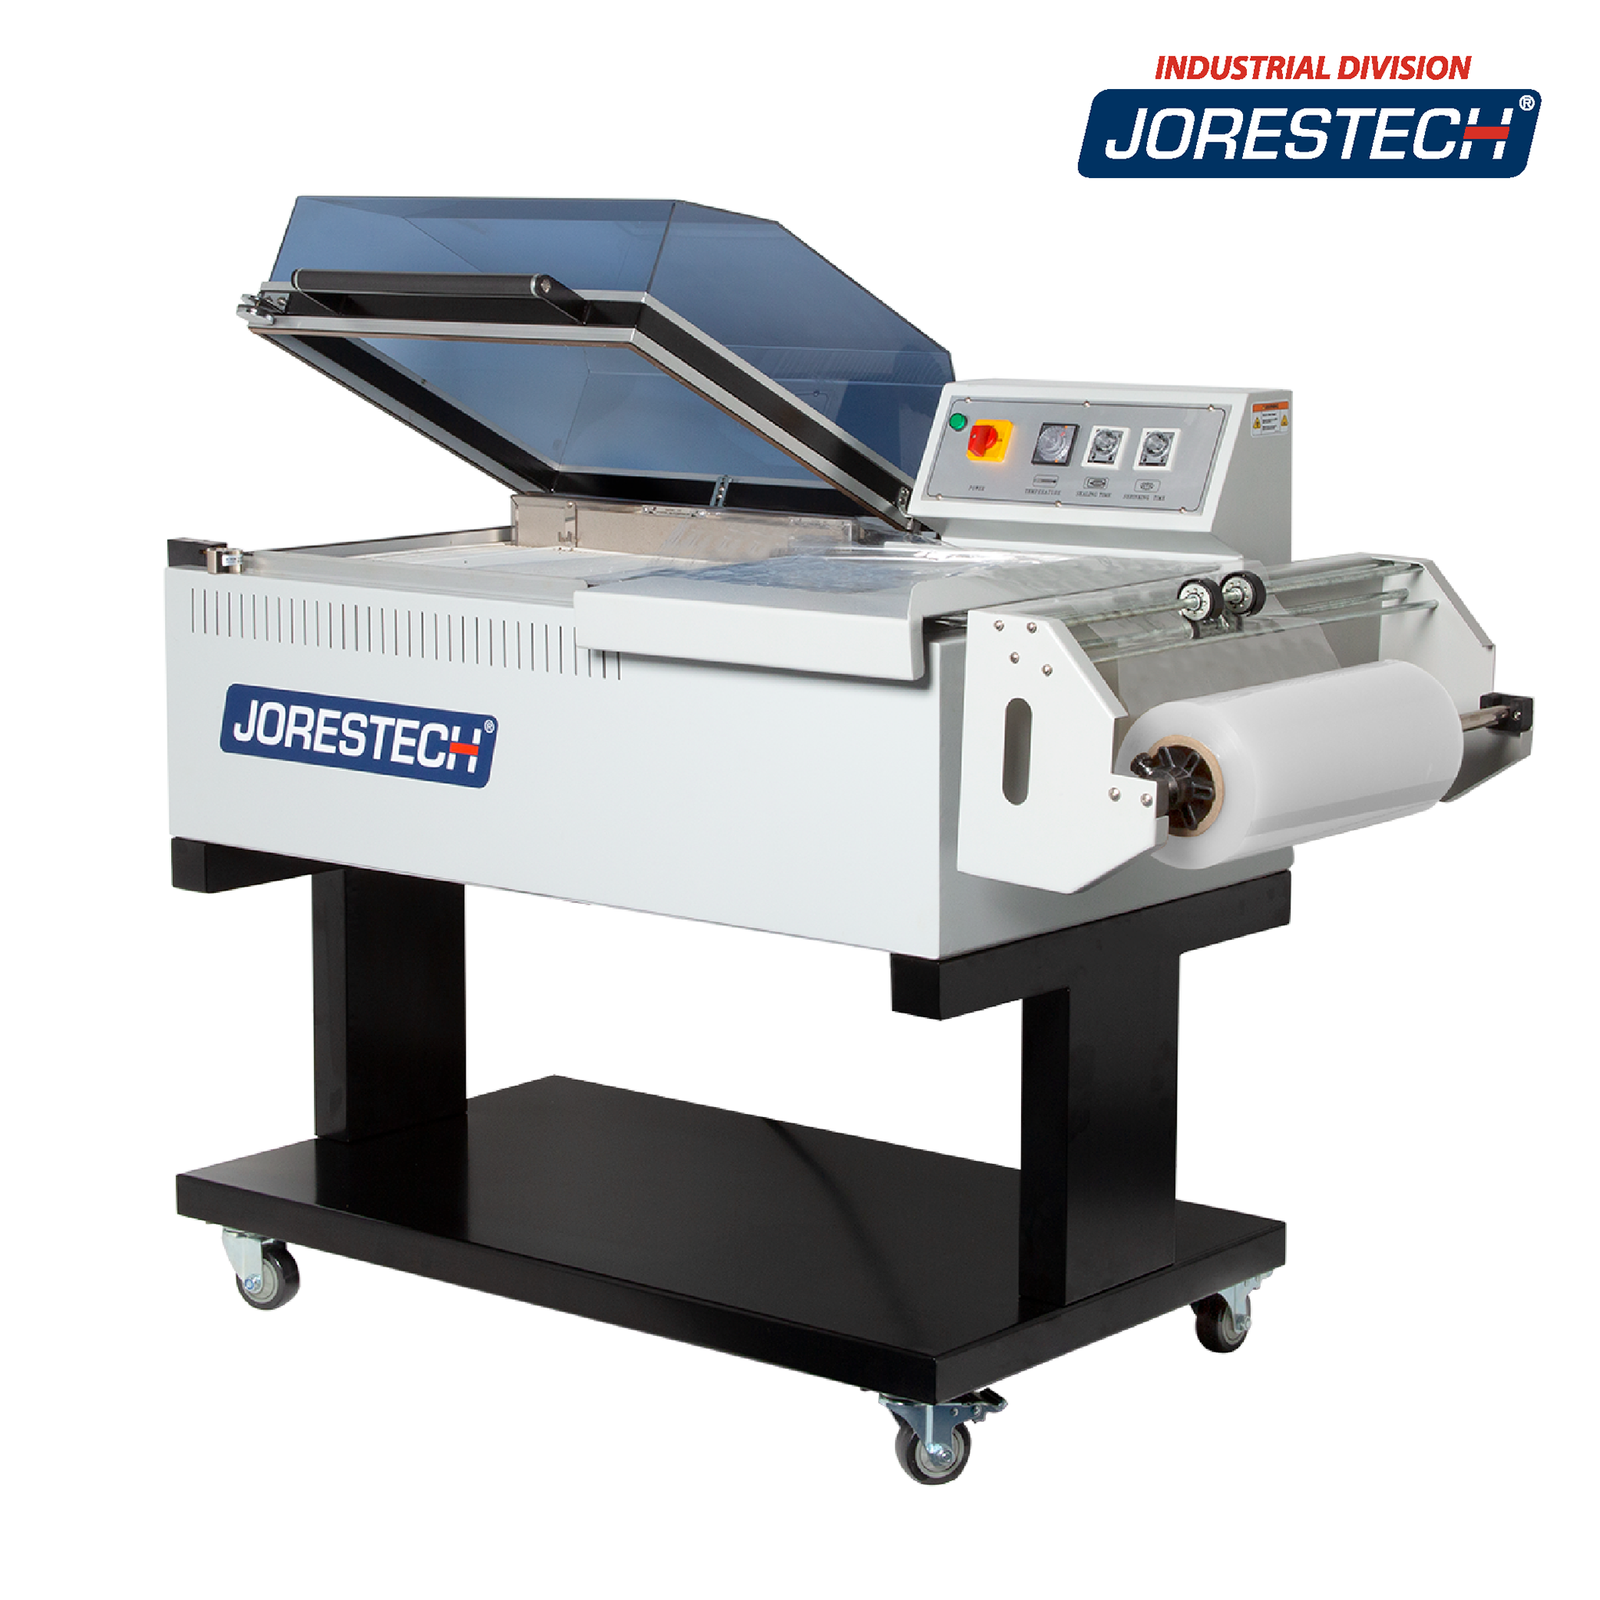 JORESTECH Complete sealing system including shrink roll dispenser, plastic sealer and cutter, and a shrink chamber with a shrink film roll mounted over a white background.